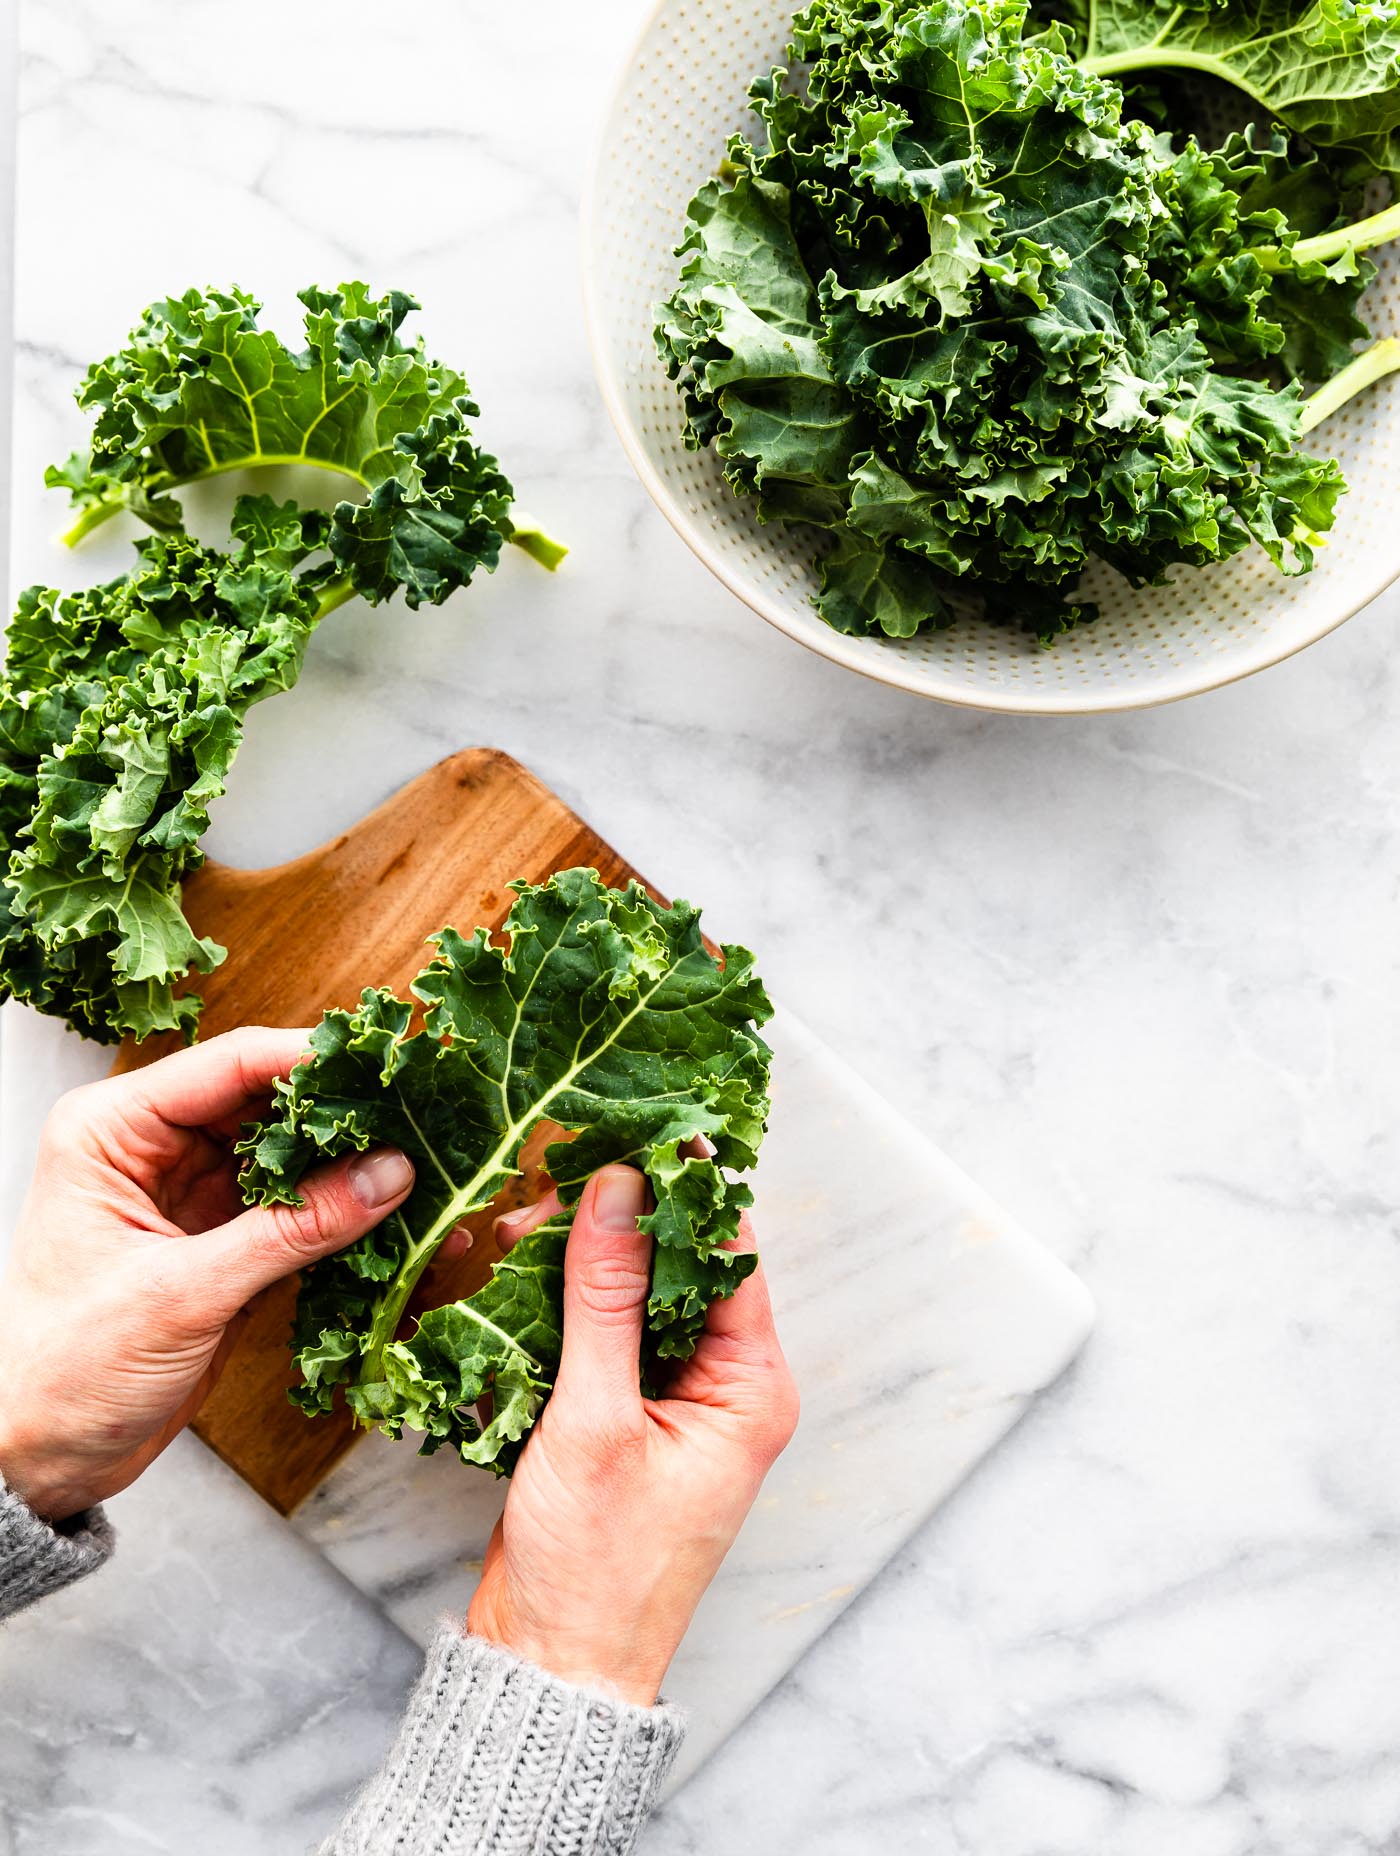 Two hands ripping kale leaf from stalk over a cutting board.